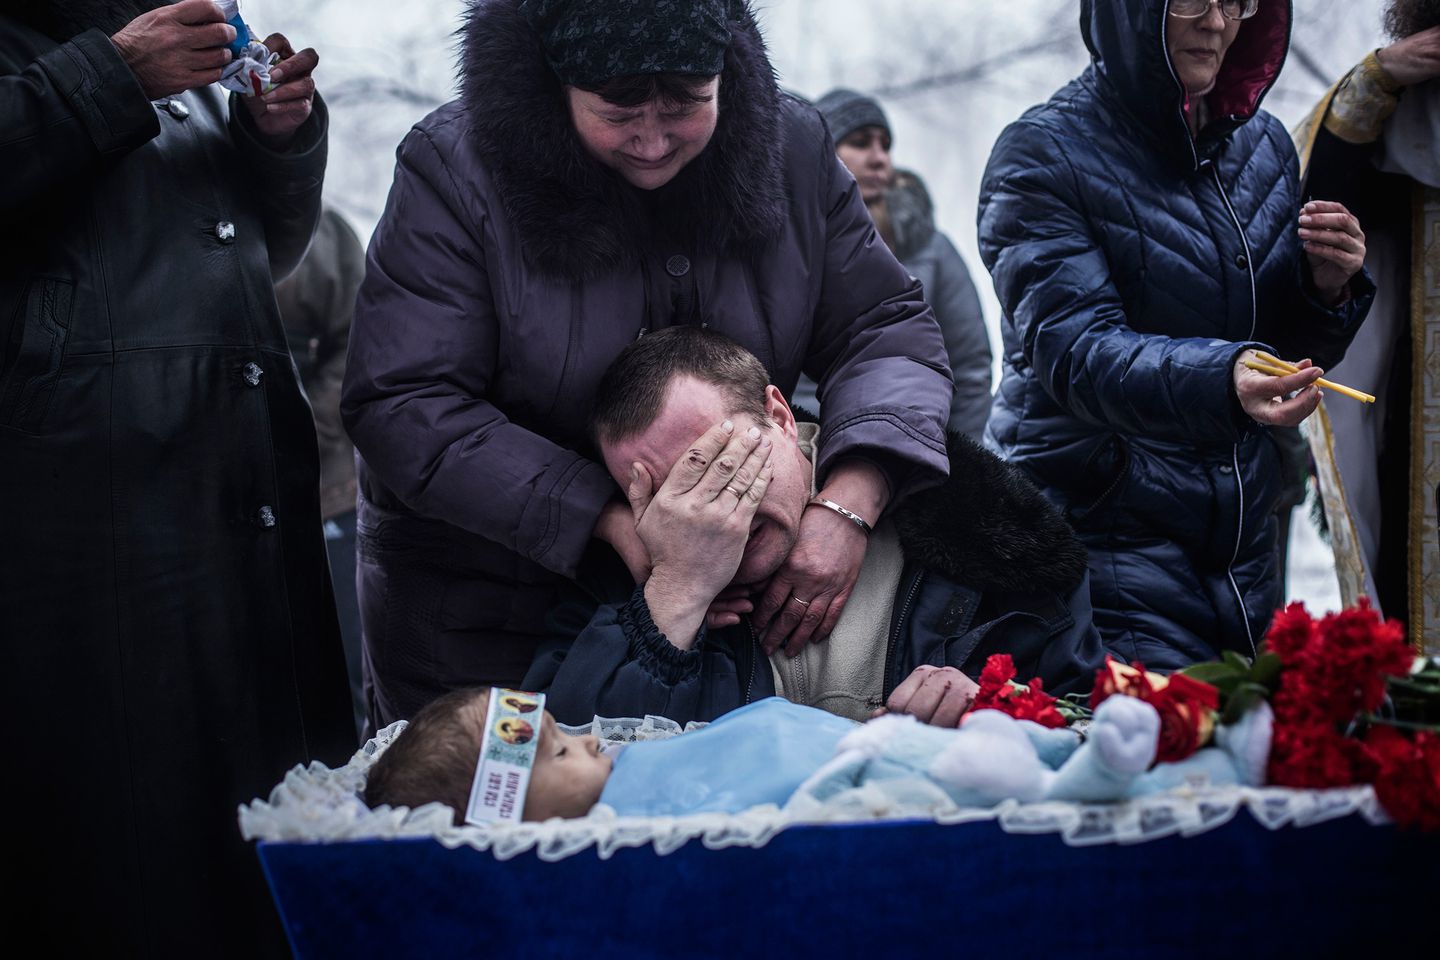 Documenting the raging civil conflict on the front lines in Donetsk, Ukraine – The Washington Post